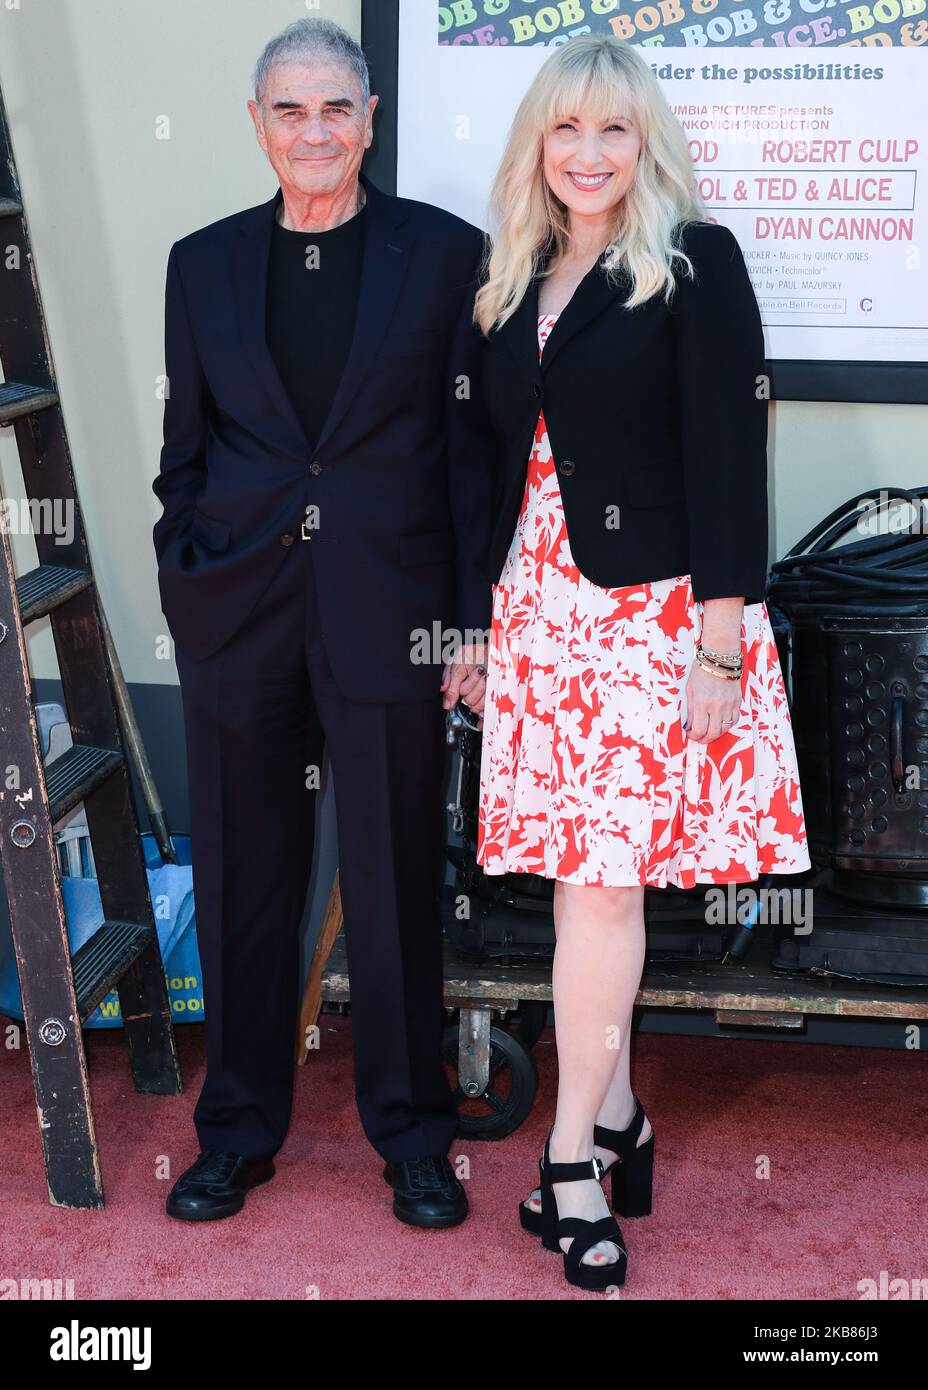 (FILE) Robert Forster Dies At 78. HOLLYWOOD, LOS ANGELES, CALIFORNIA, USA - JULY 22: Actor Robert Forster and partner Evie Forster arrive at the World Premiere Of Sony Pictures' 'Once Upon a Time In Hollywood' held at the TCL Chinese Theatre IMAX on July 22, 2019 in Hollywood, Los Angeles, California, United States. (Photo by Xavier Collin/Image Press Agency/NurPhoto) Stock Photo